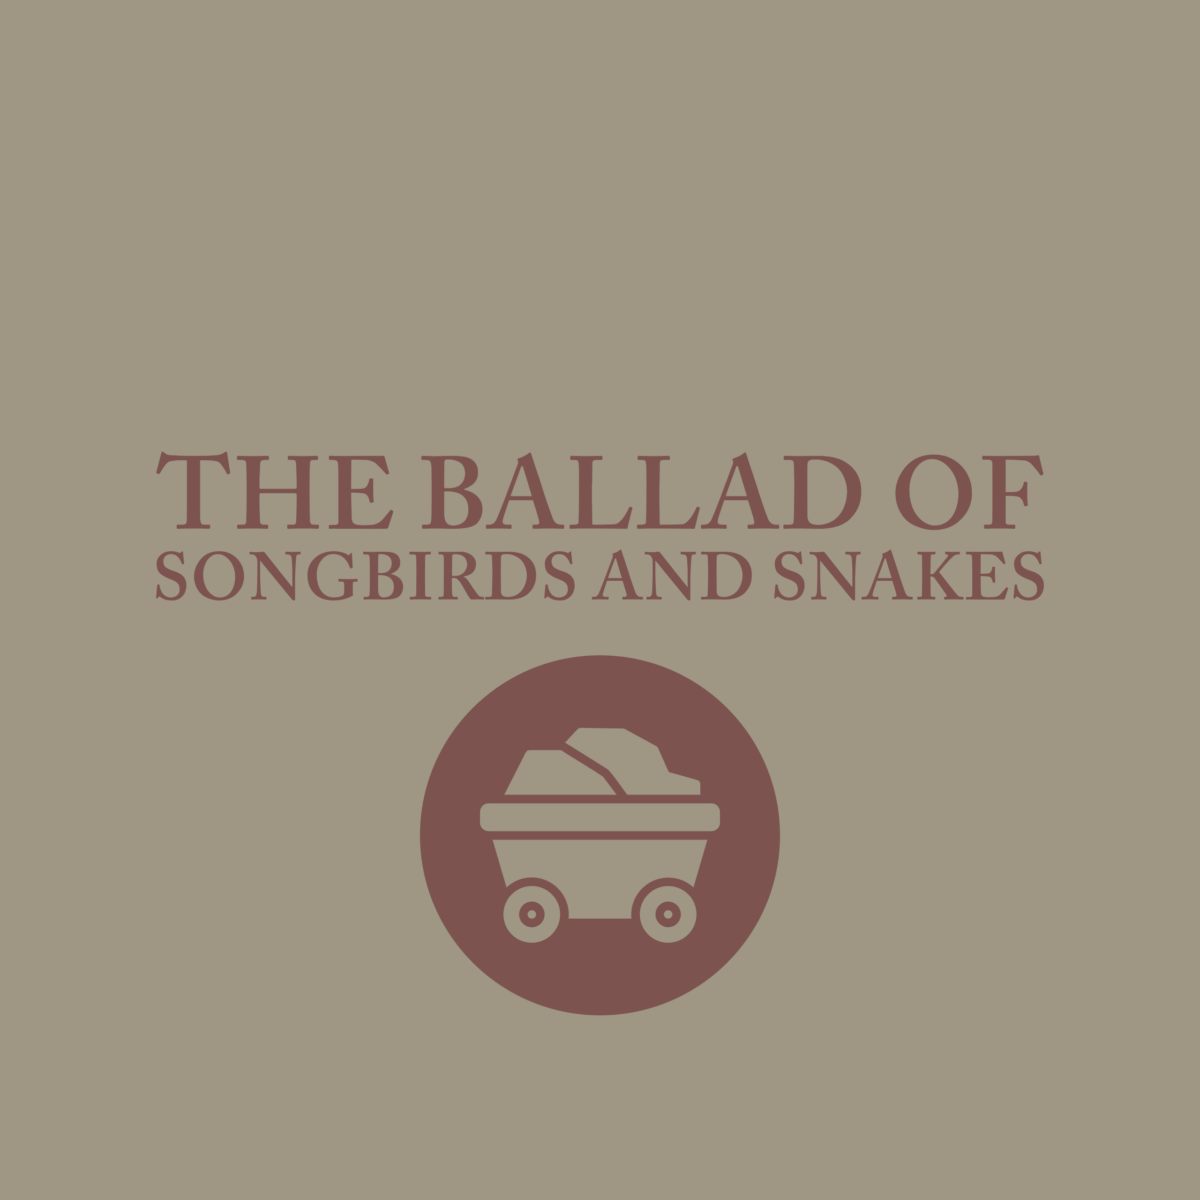 The newest Hunger Games Movie: The Ballad of Songbirds and Snakes was released on November 17, 2023, bringing $200 million into the box office.